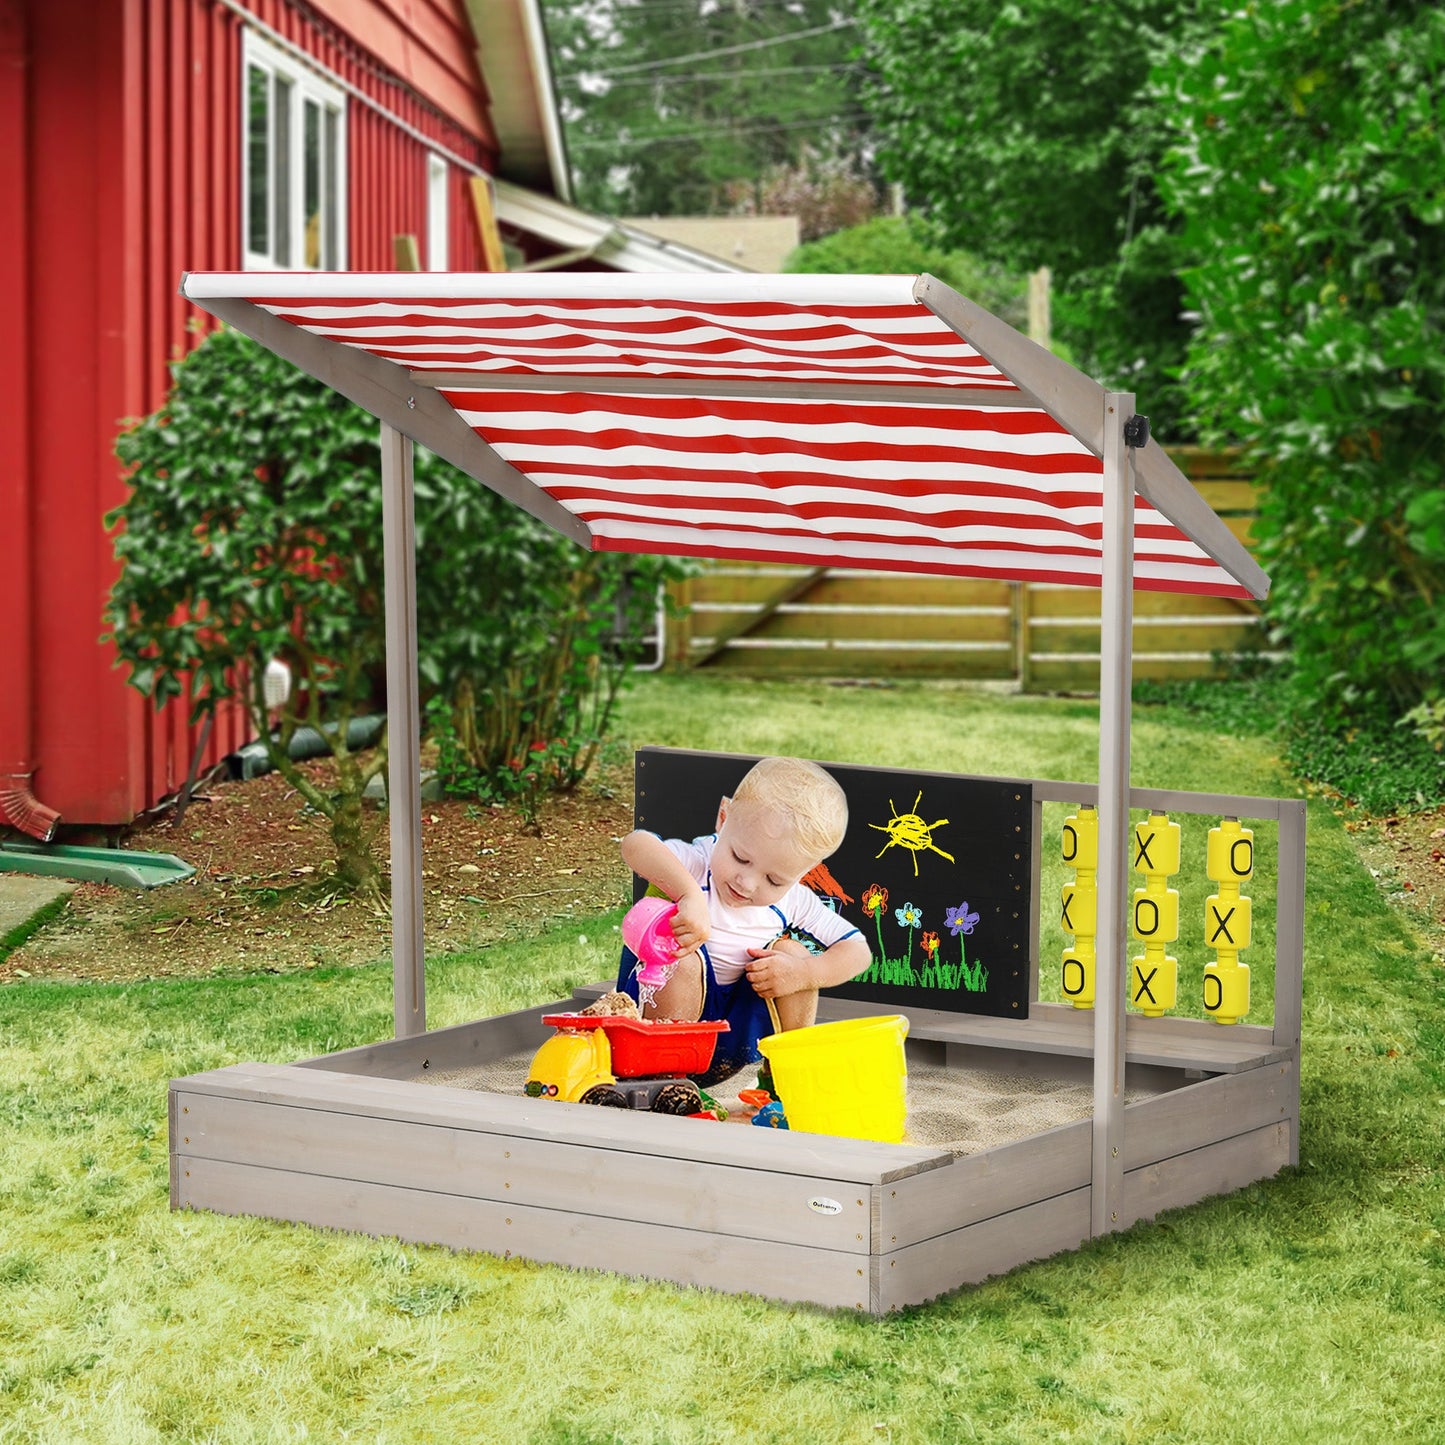 Outdoor and Garden-Kids Wooden Sandbox with Adjustable Canopy, Bench Seats, Ground Liner, 45x45in Outdoor Sand Box for Backyard, Lawn, Garden, Gray - Outdoor Style Company